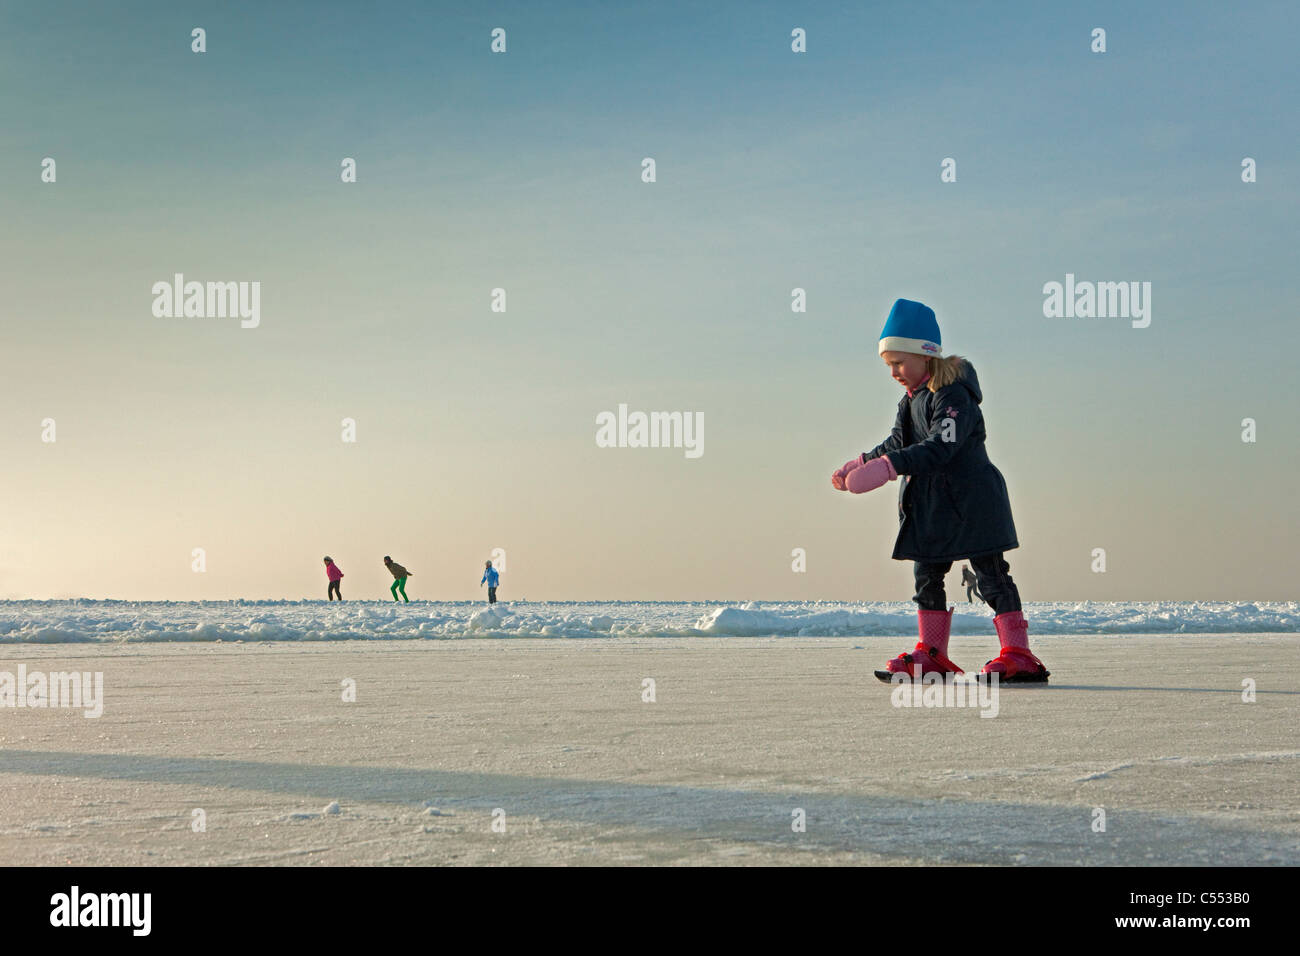 The Netherlands, Hindeloopen, Dutch capital of skating culture. Girl learning to skate on lake called IJsselmeer. Stock Photo